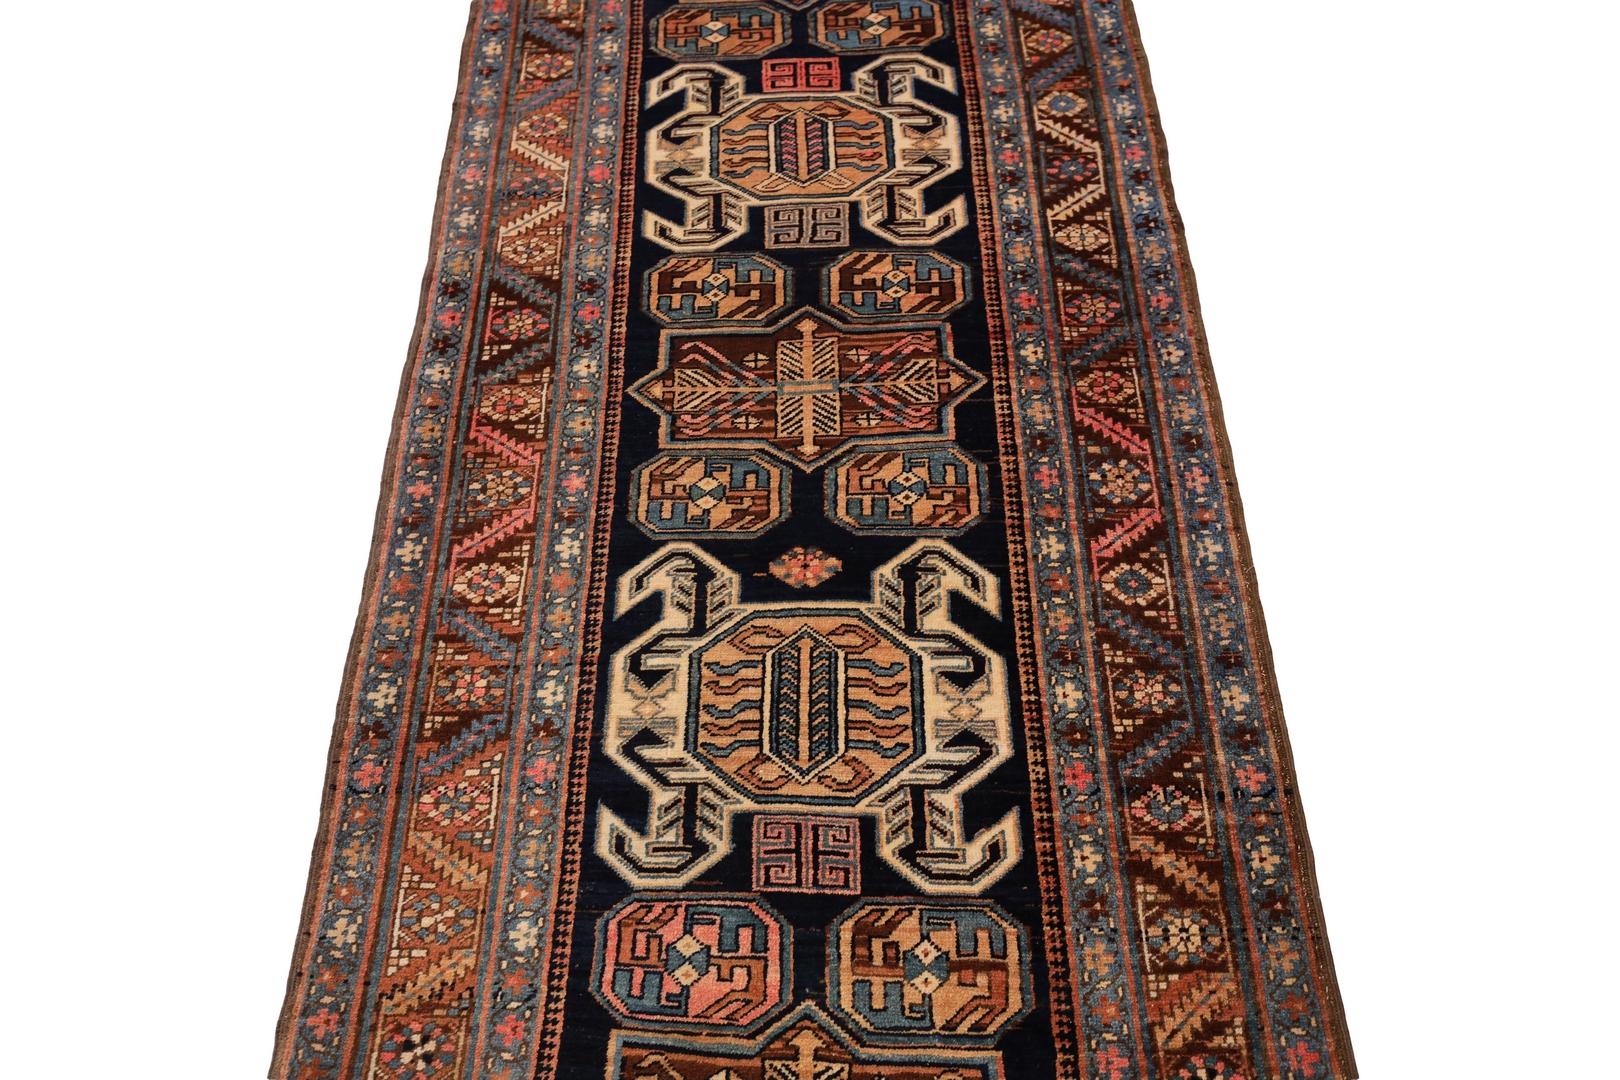 Other North-Western Persian Antique runner - 3'3